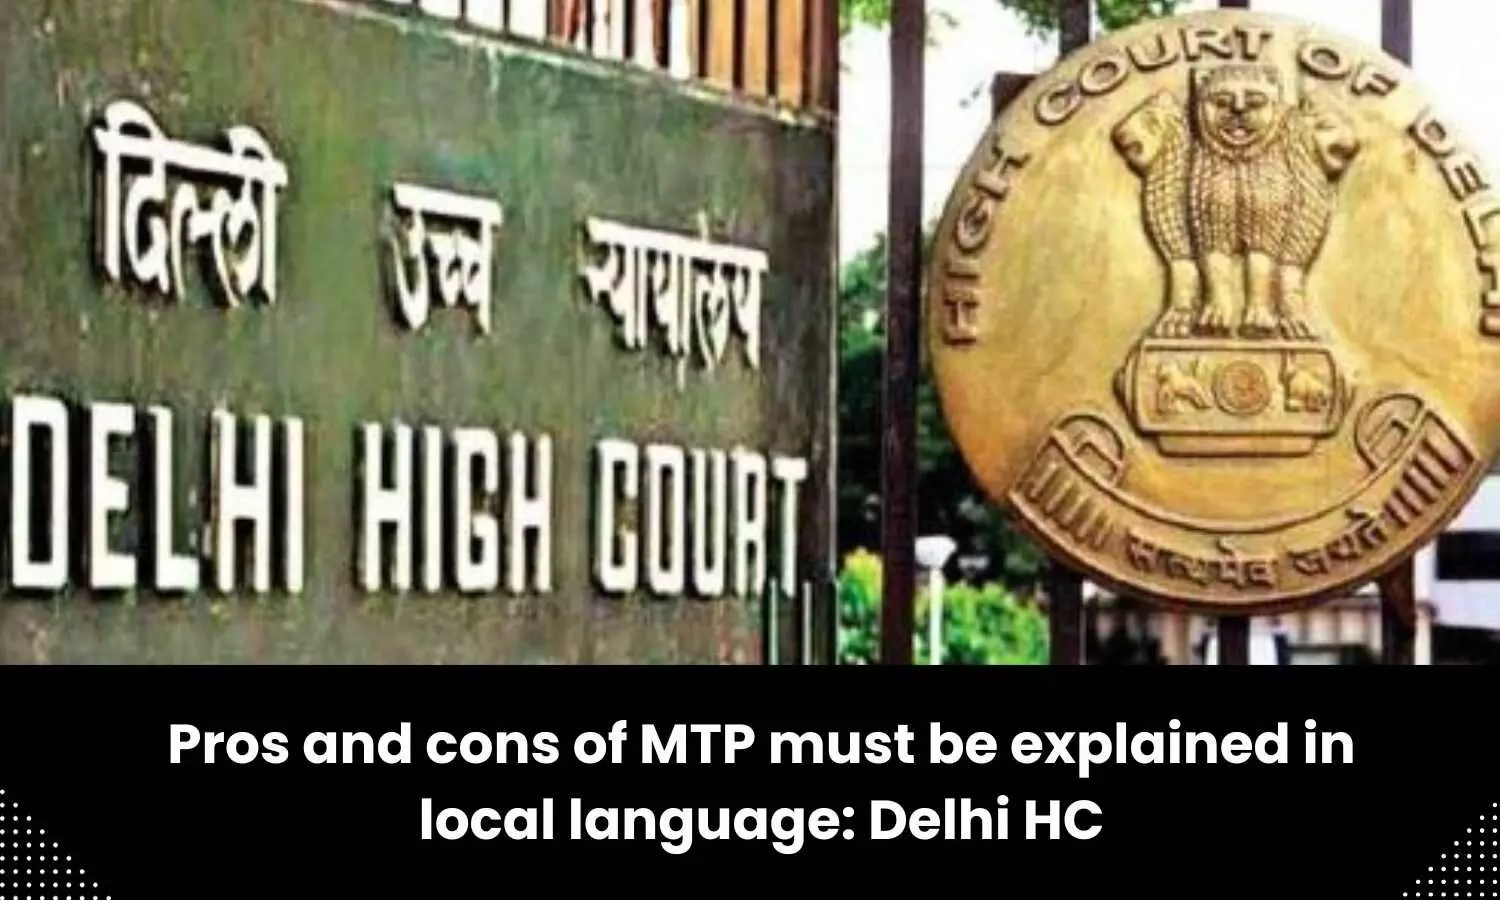 Cons, Pros of MTP must be explained in local language: Delhi High Court